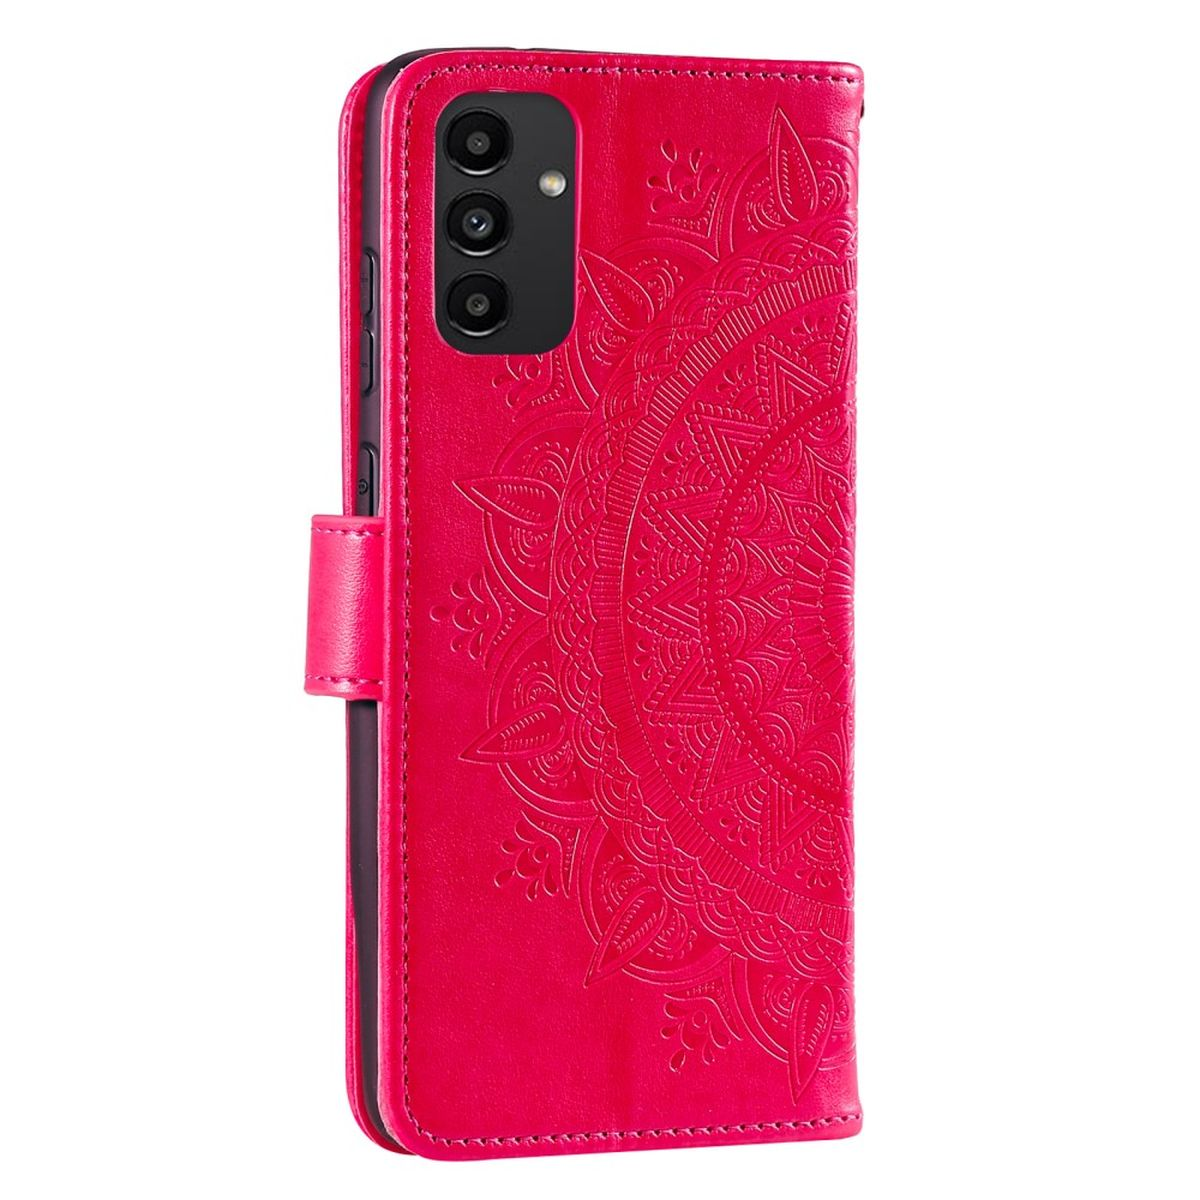 COVERKINGZ Bookcover, A04s, A13 5G/Galaxy Klapphülle Mandala Muster, Samsung, Galaxy mit Pink